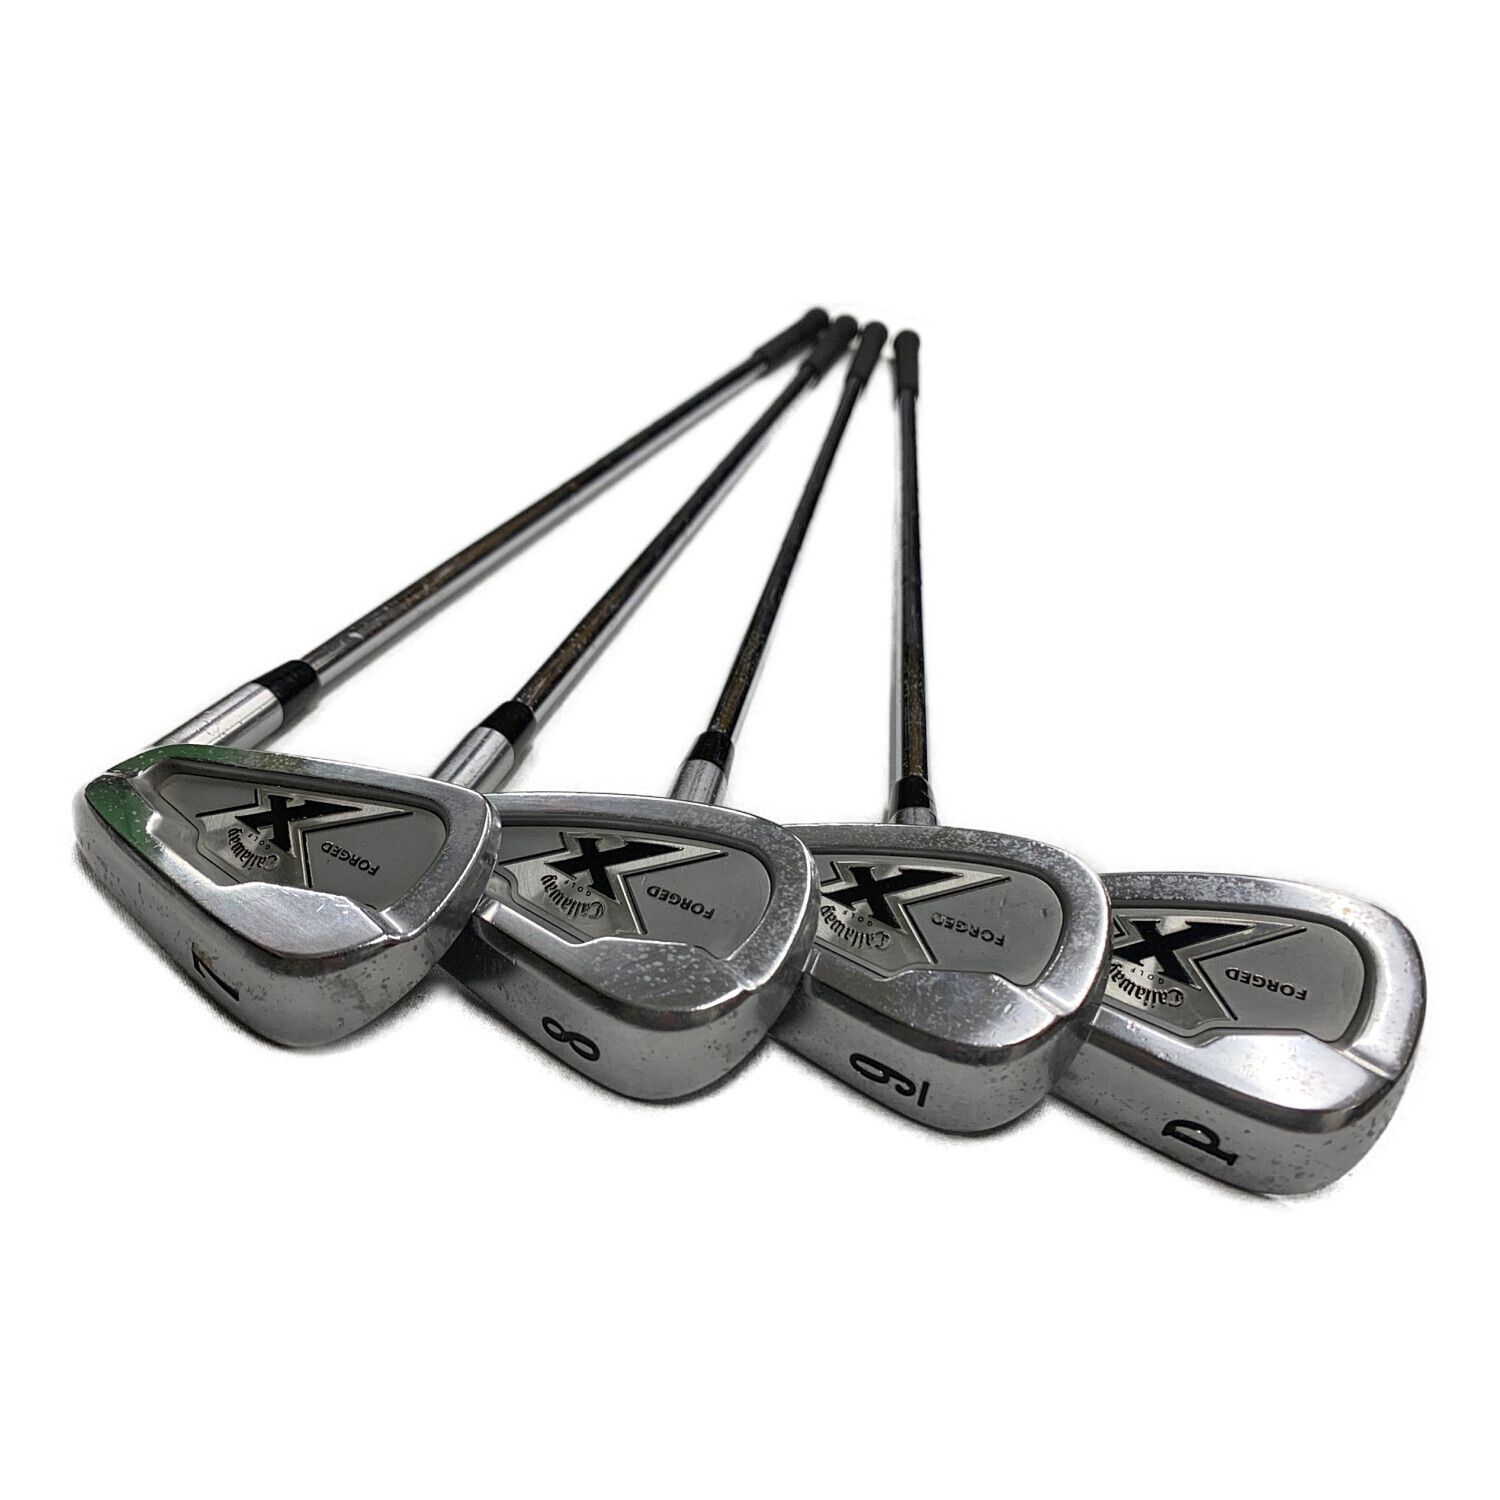 Callaway (キャロウェイ) アイアンセット FORGED 8本セット(3/4/5/6/7 